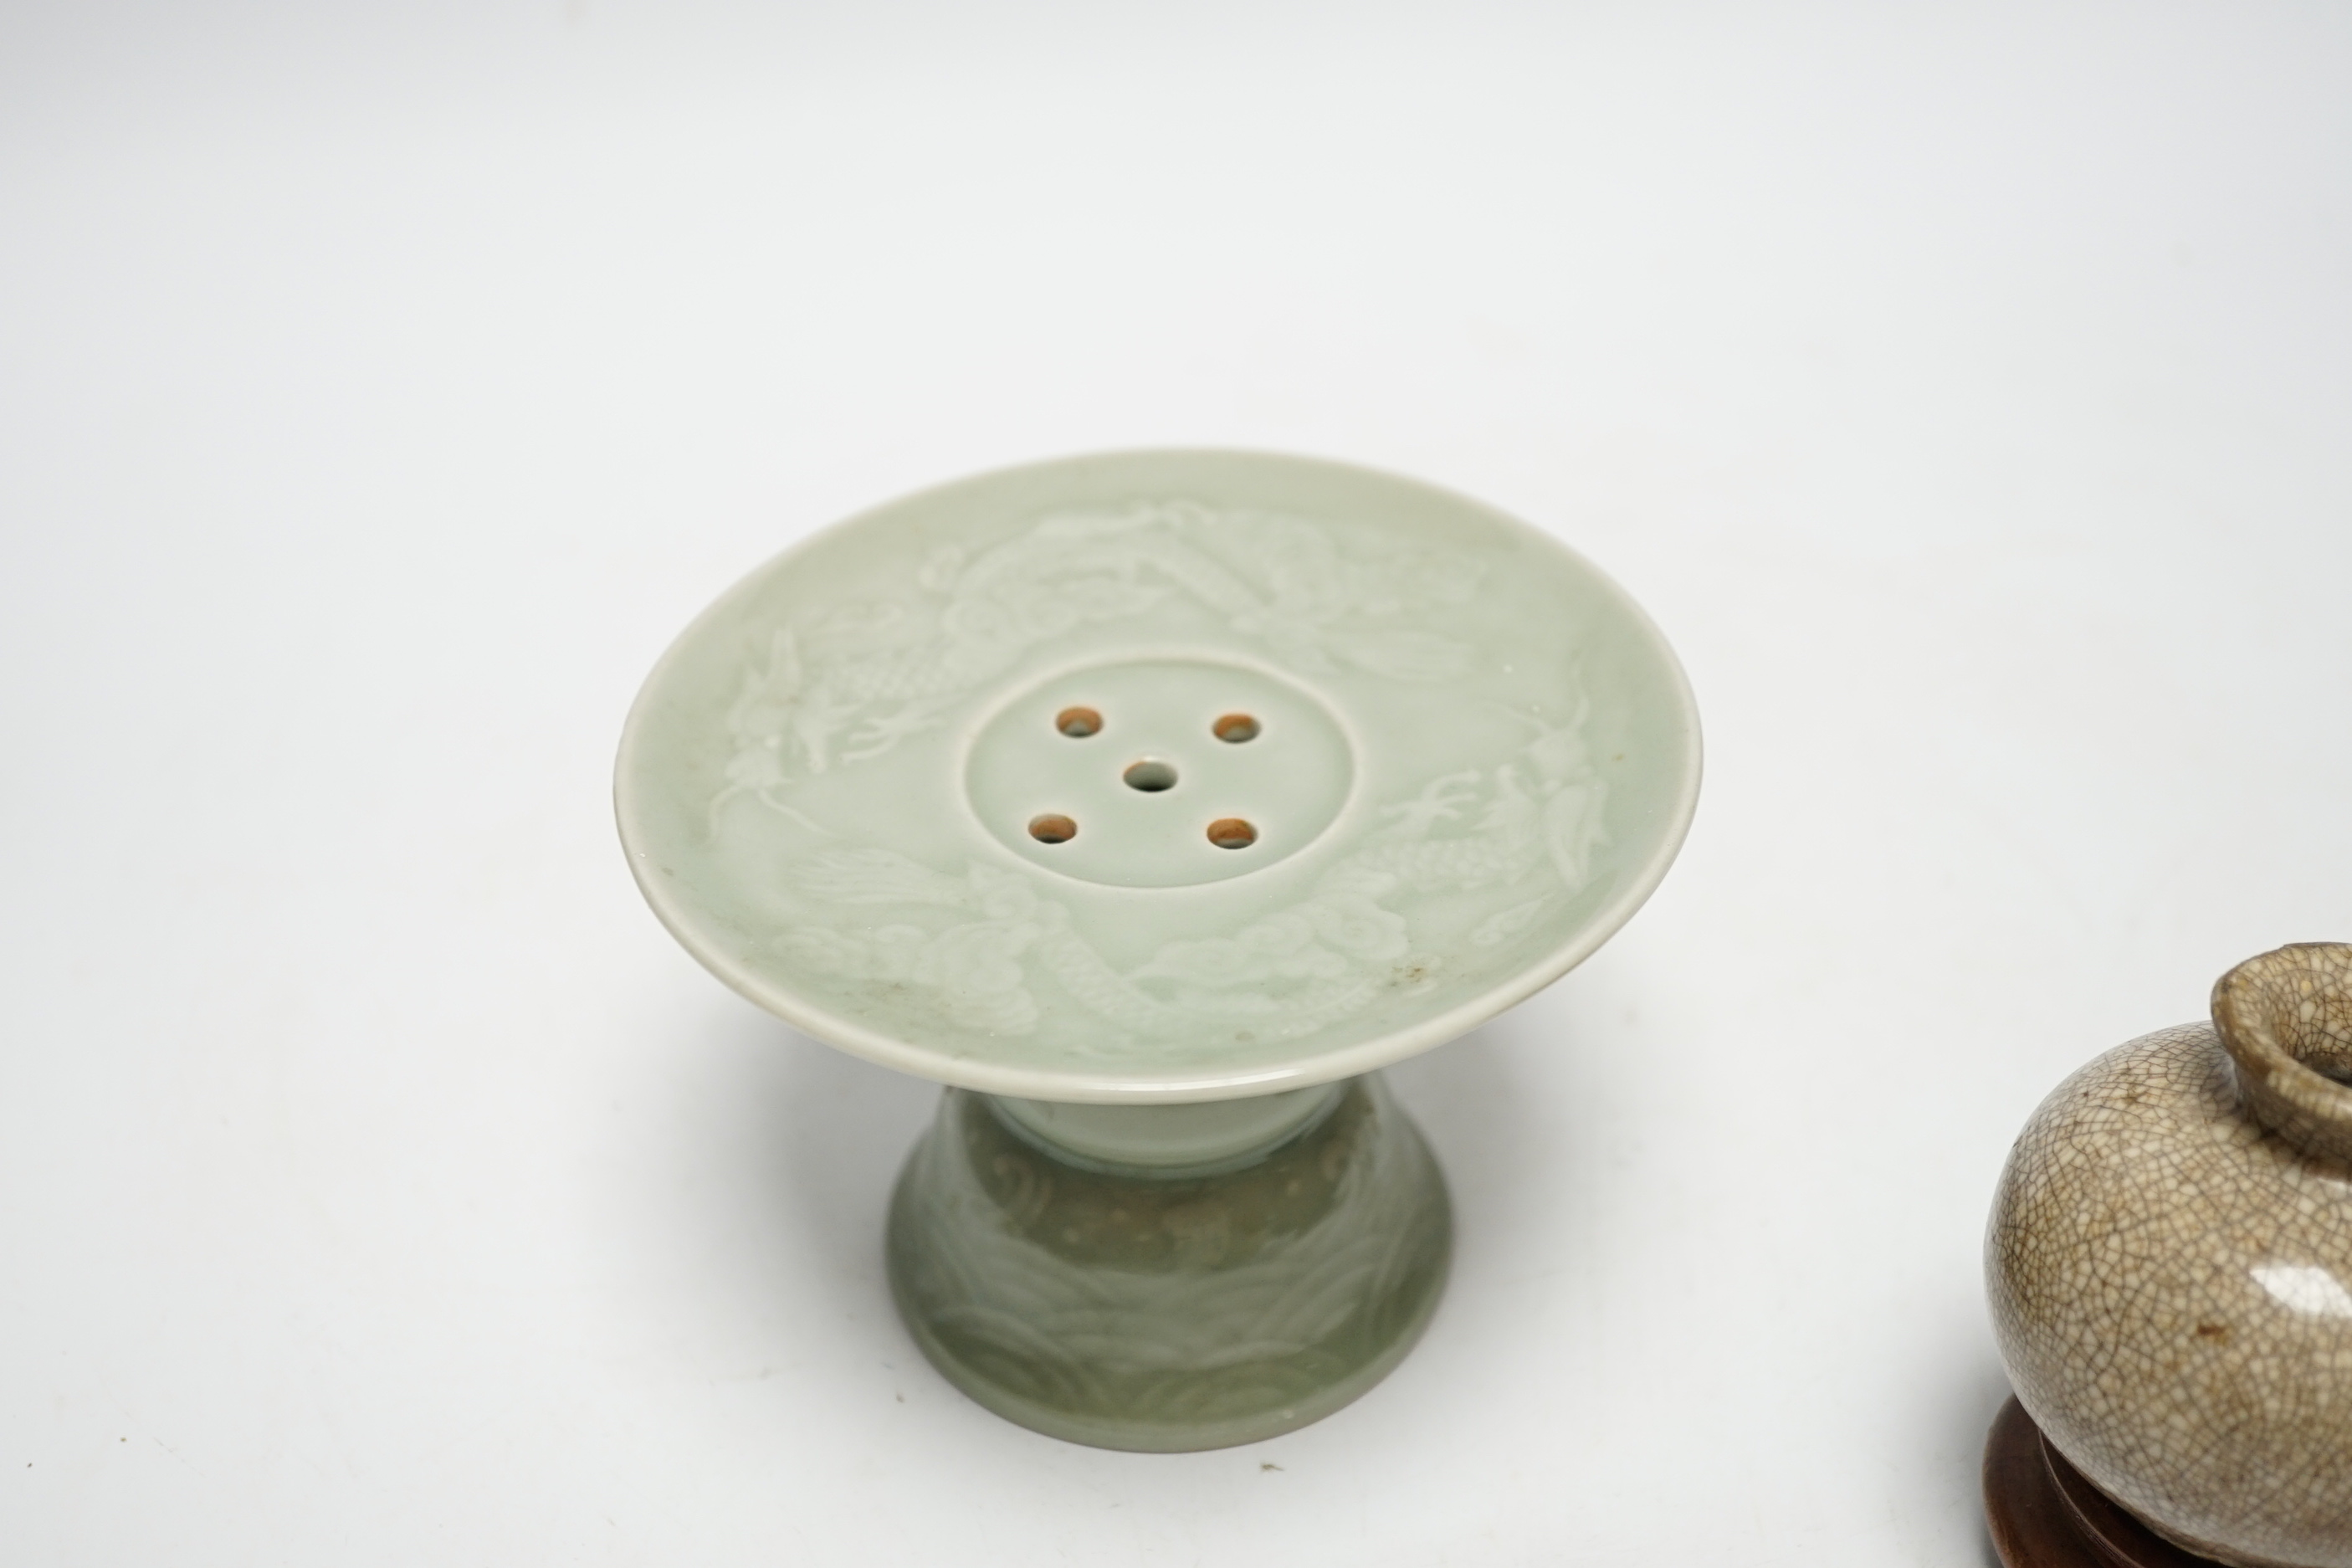 A Chinese celadon glazed 'dragon' puzzle cup and stand, early 20th century and a Chinese crackle glaze vase, 19th century, cup 7.5cm